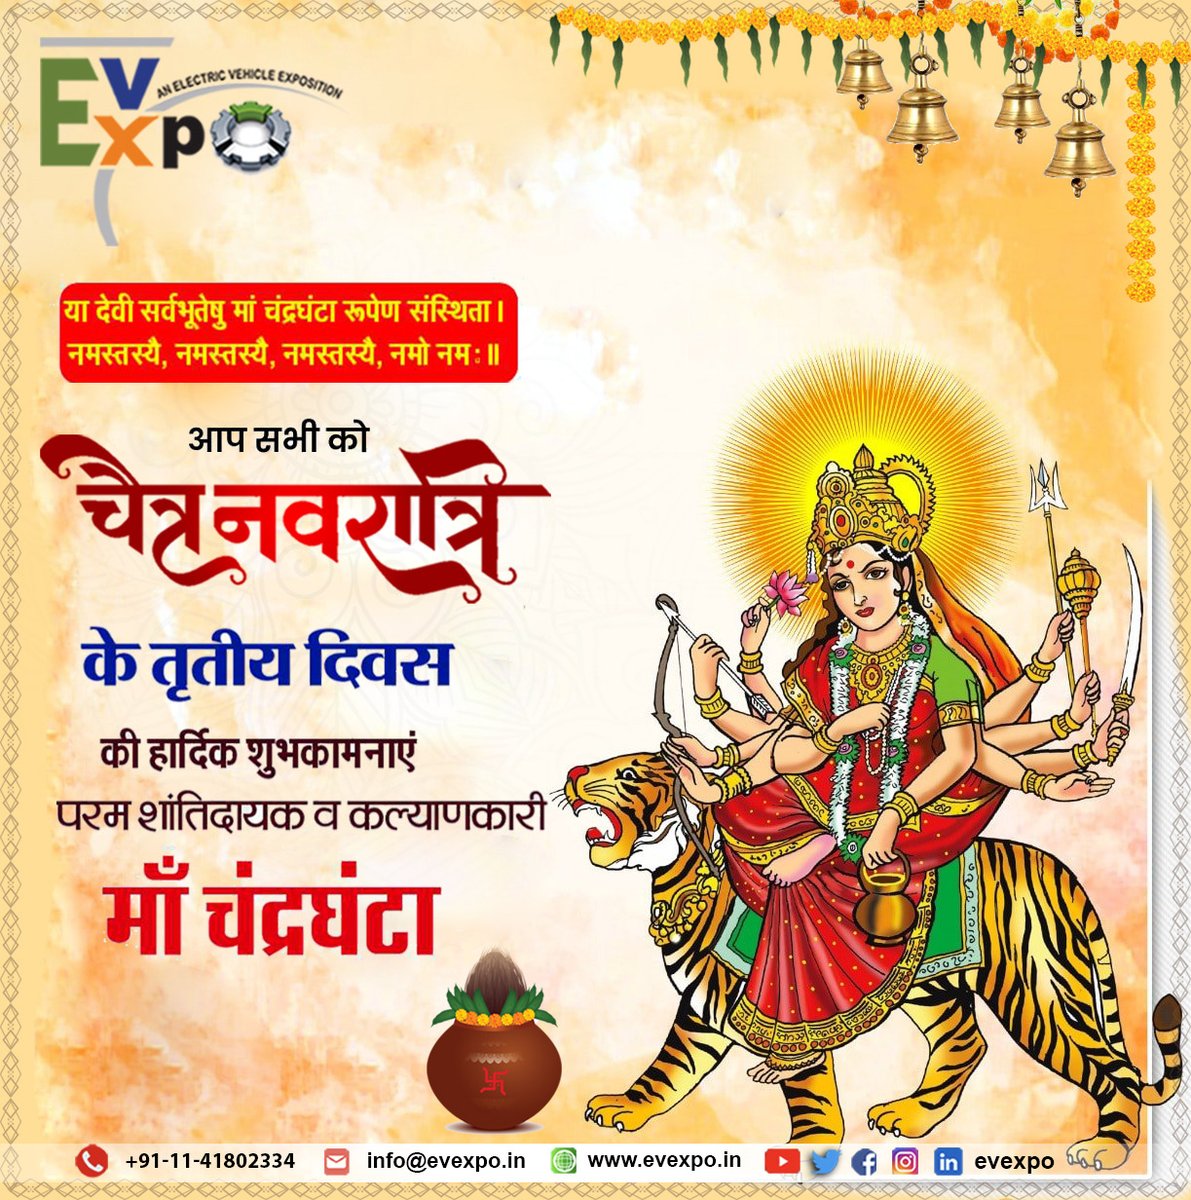 'Today, on the third auspicious day of Navratri, we worship Chandraghanta Maa, adorned with grace and strength. Her serene presence fills the air with positivity at EvExpo. 

🙏🌟 #chandraghantamaa #Navratri  #evexpo #divineconnection #GoodVibes